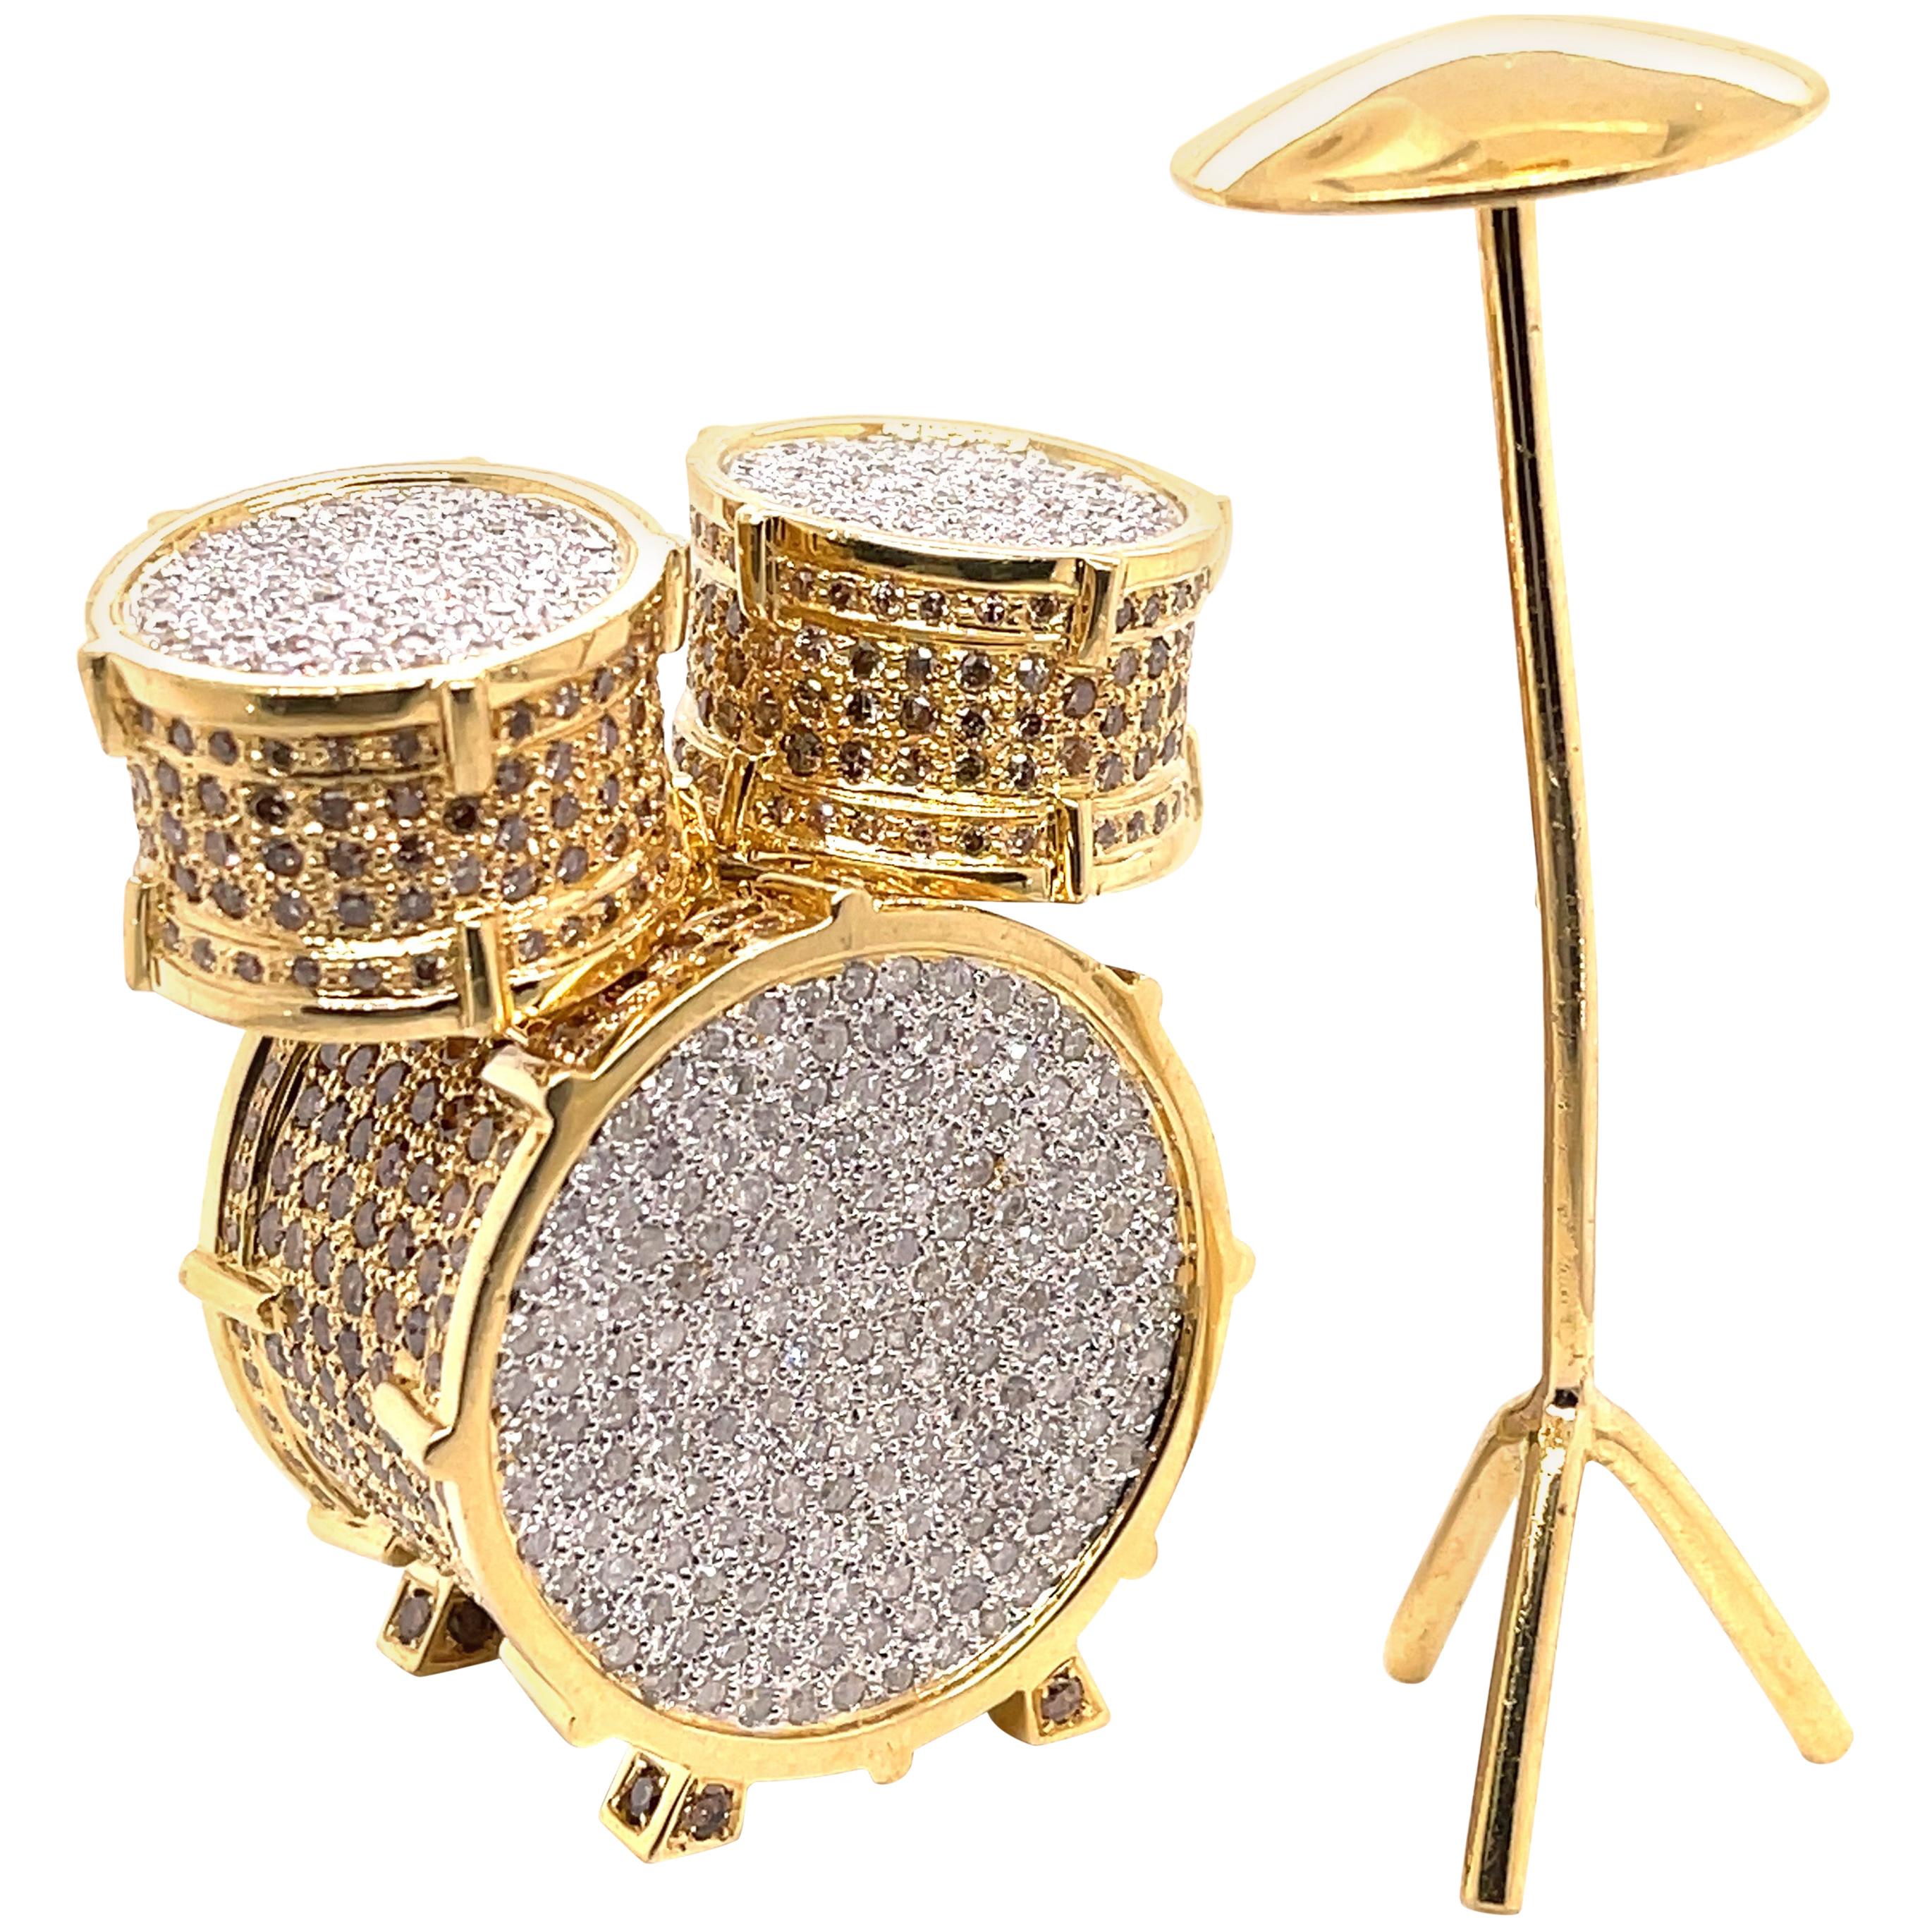 22.91 Carat Brown Diamond Drum Set in 18k Gold by Shimon's Creations